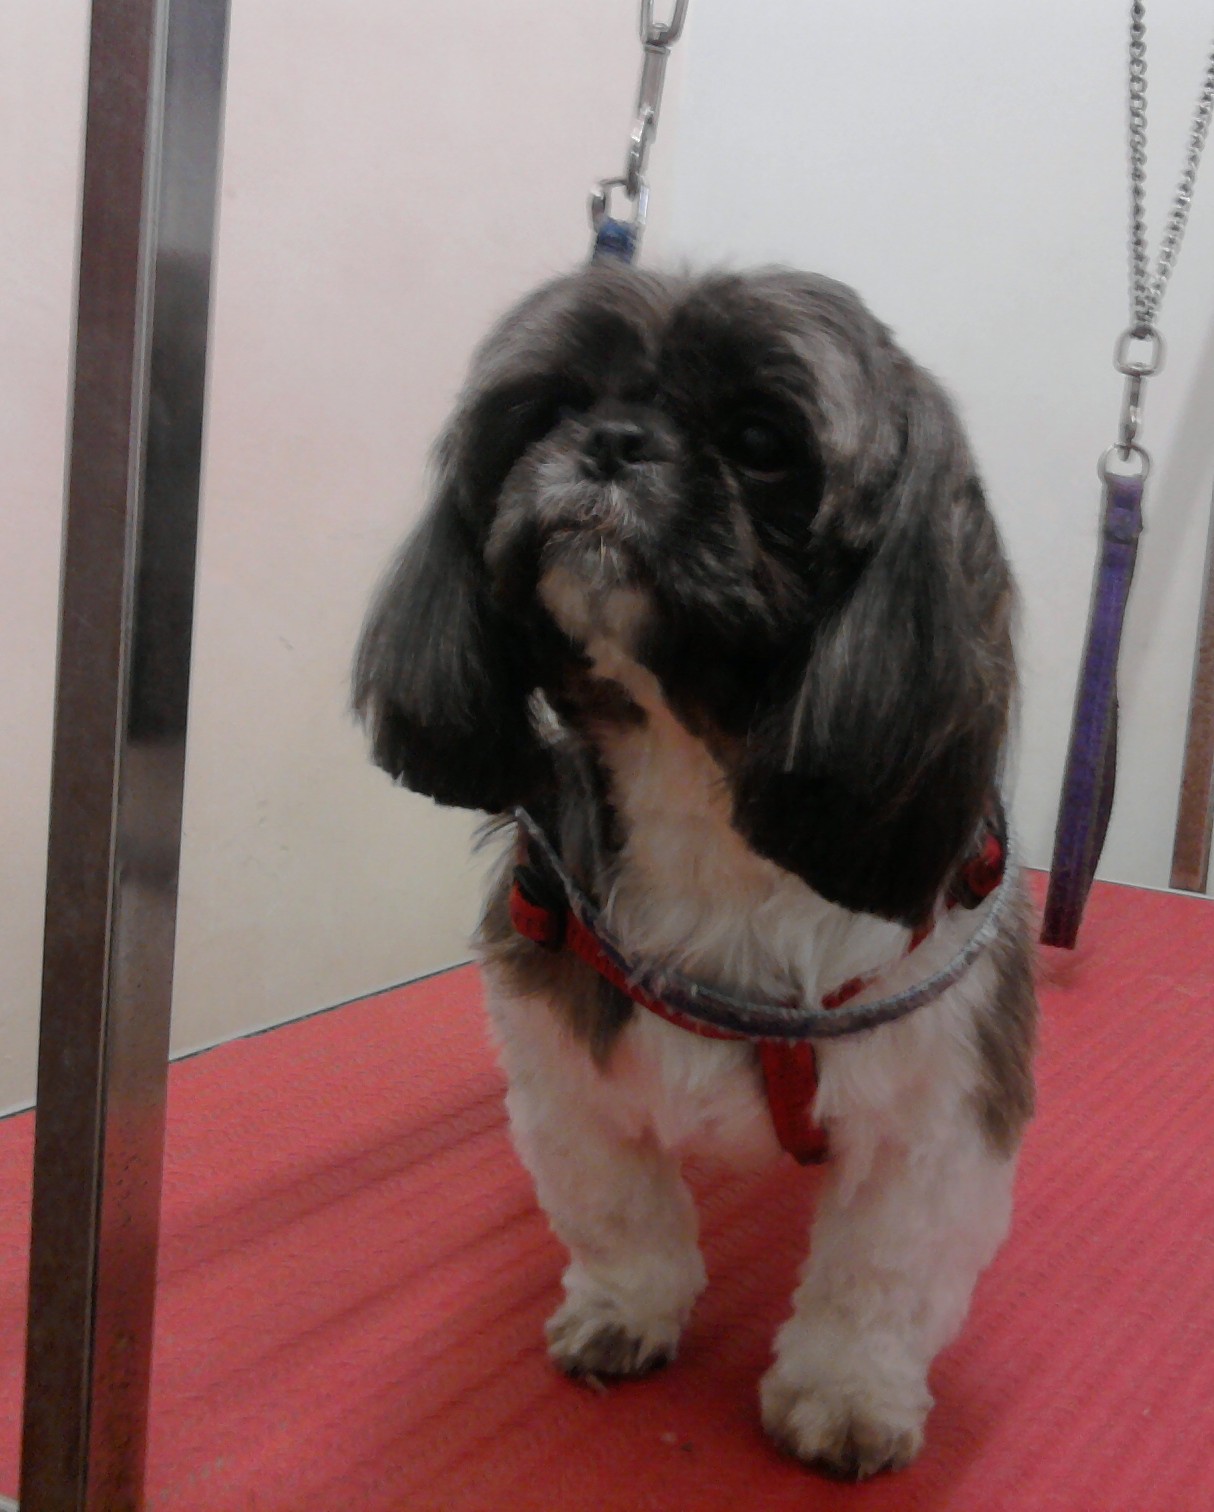 Dog in the groomers